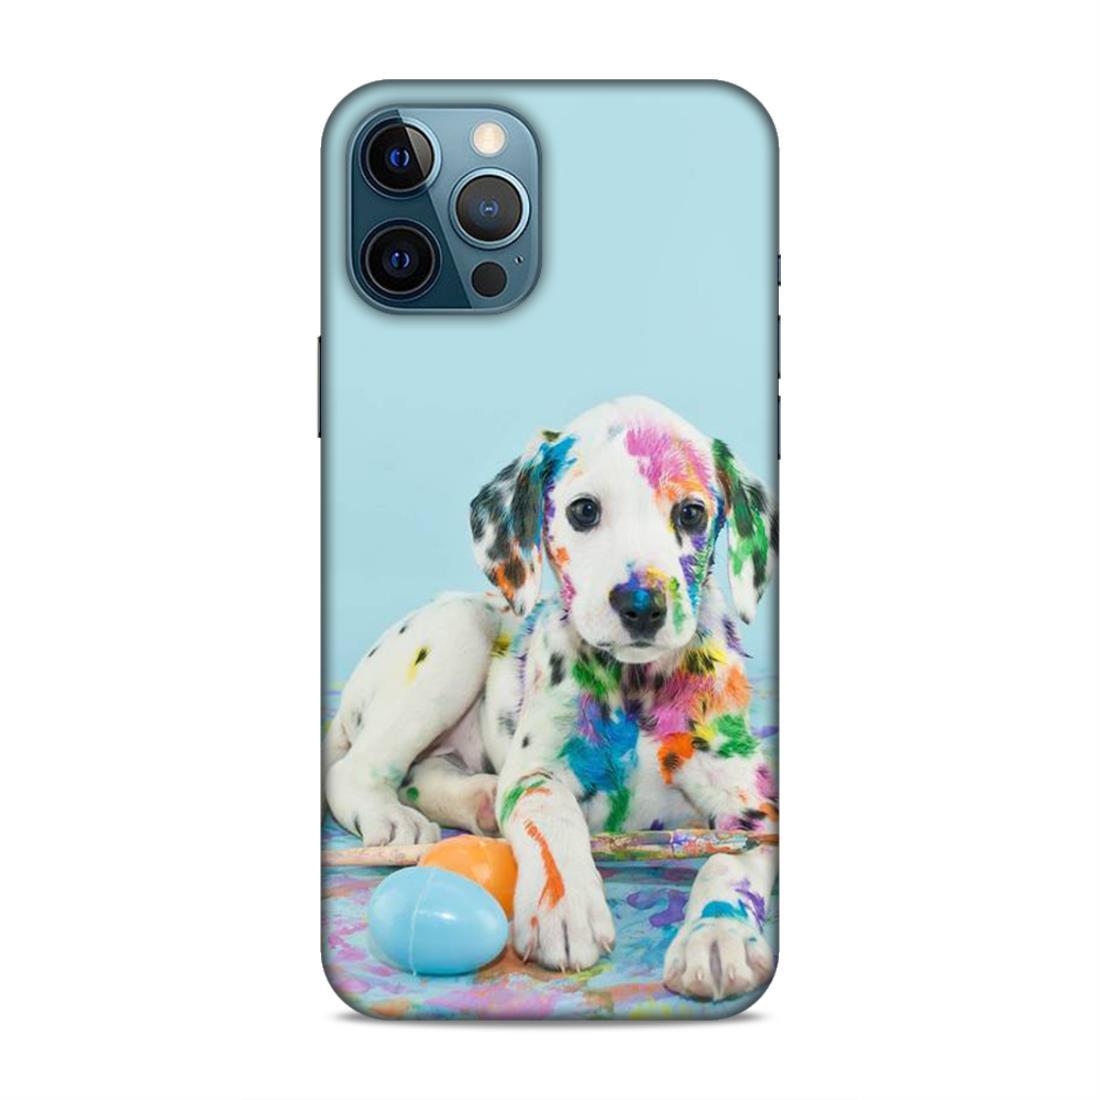 Cute Dog Lover iPhone 12 Pro Max Mobile Case Cover